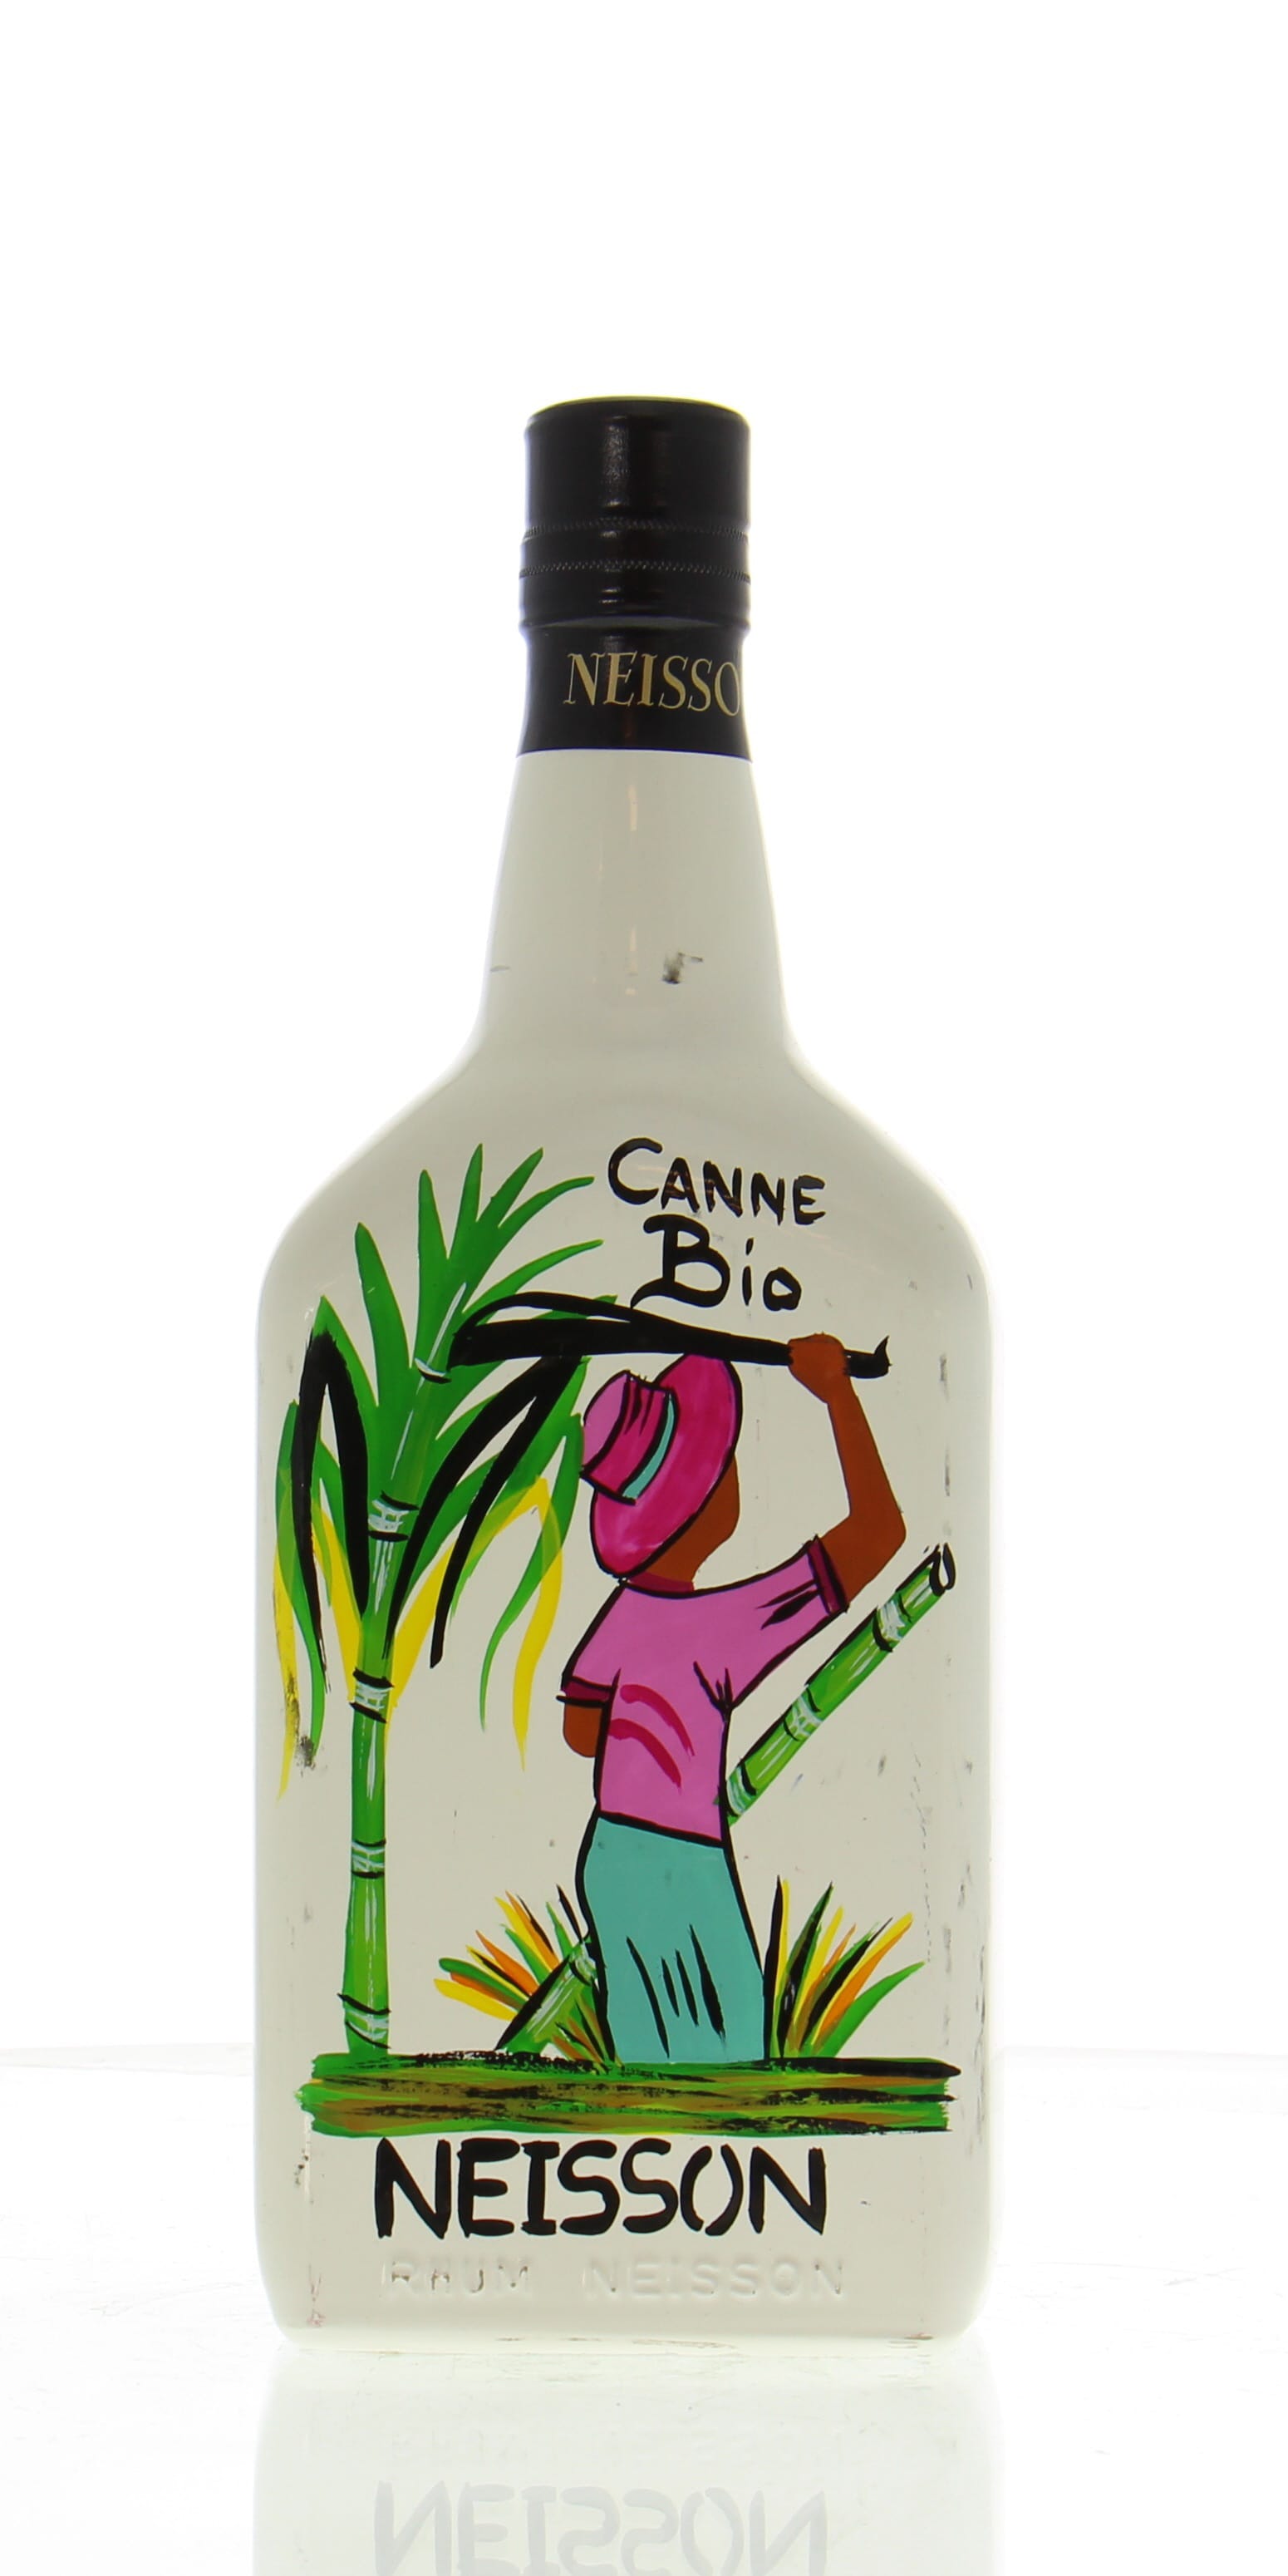 Thieubert Carbet Neisson - Rhum Agricole Canne Bio Bottled for 60th Anniversary of La Maison du Whisky 55% NV Perfect